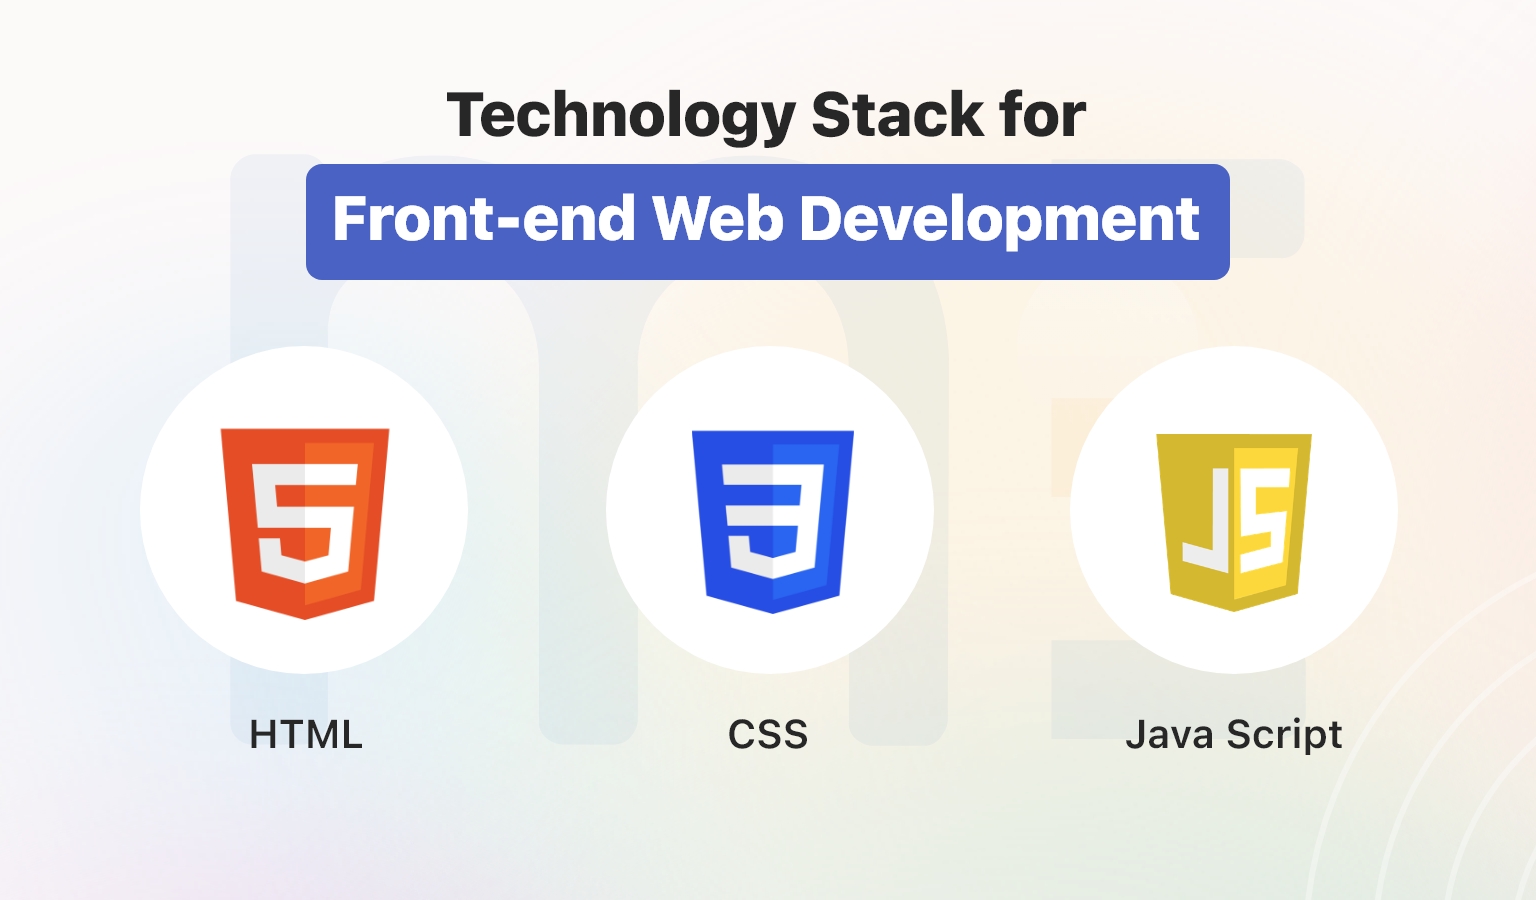 fron end technology stack for web application development